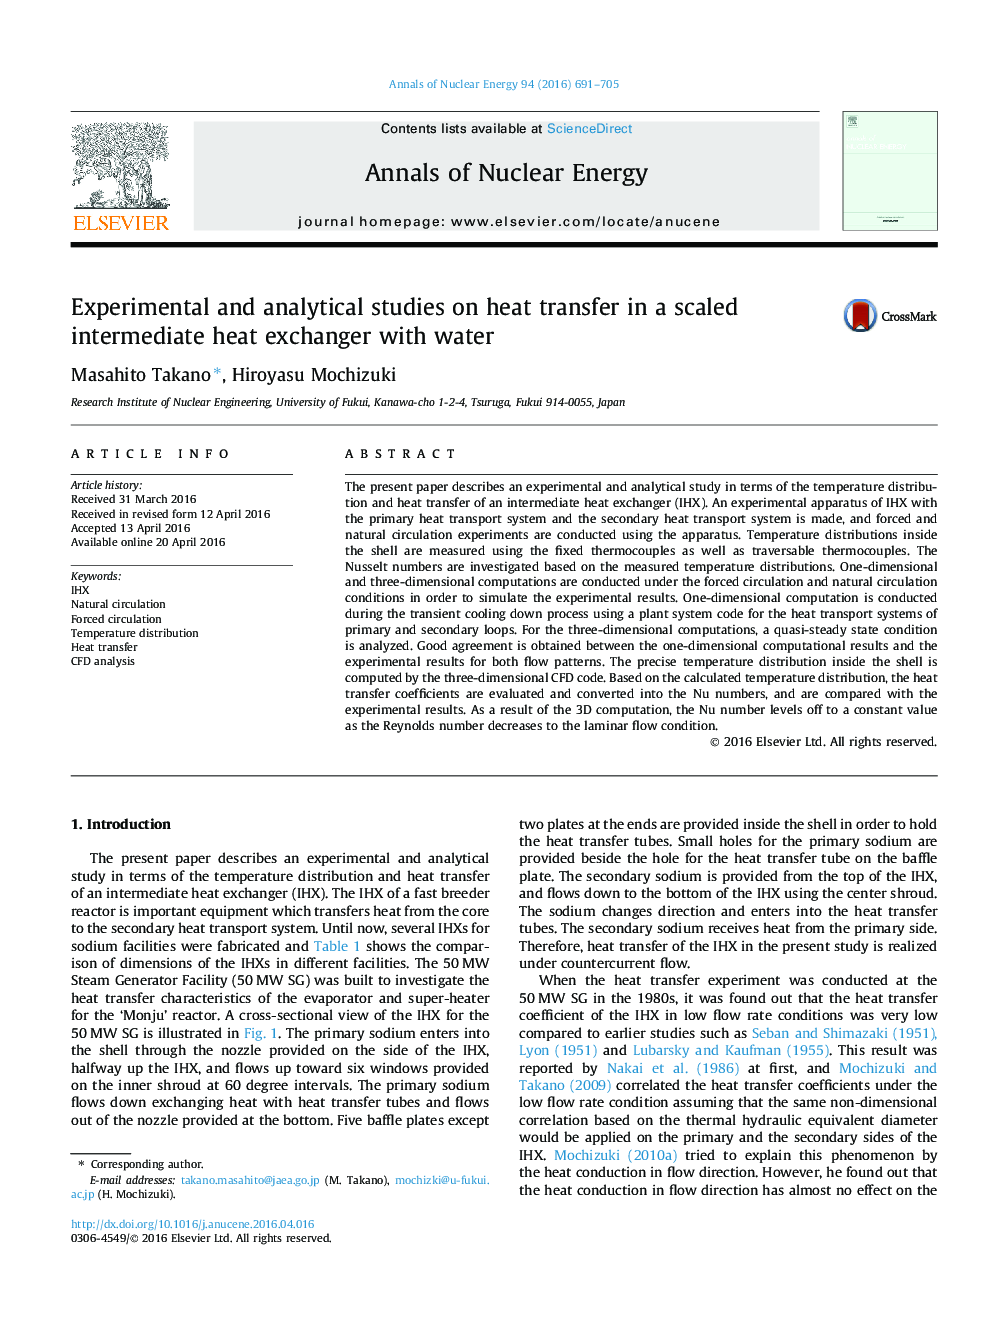 Experimental and analytical studies on heat transfer in a scaled intermediate heat exchanger with water